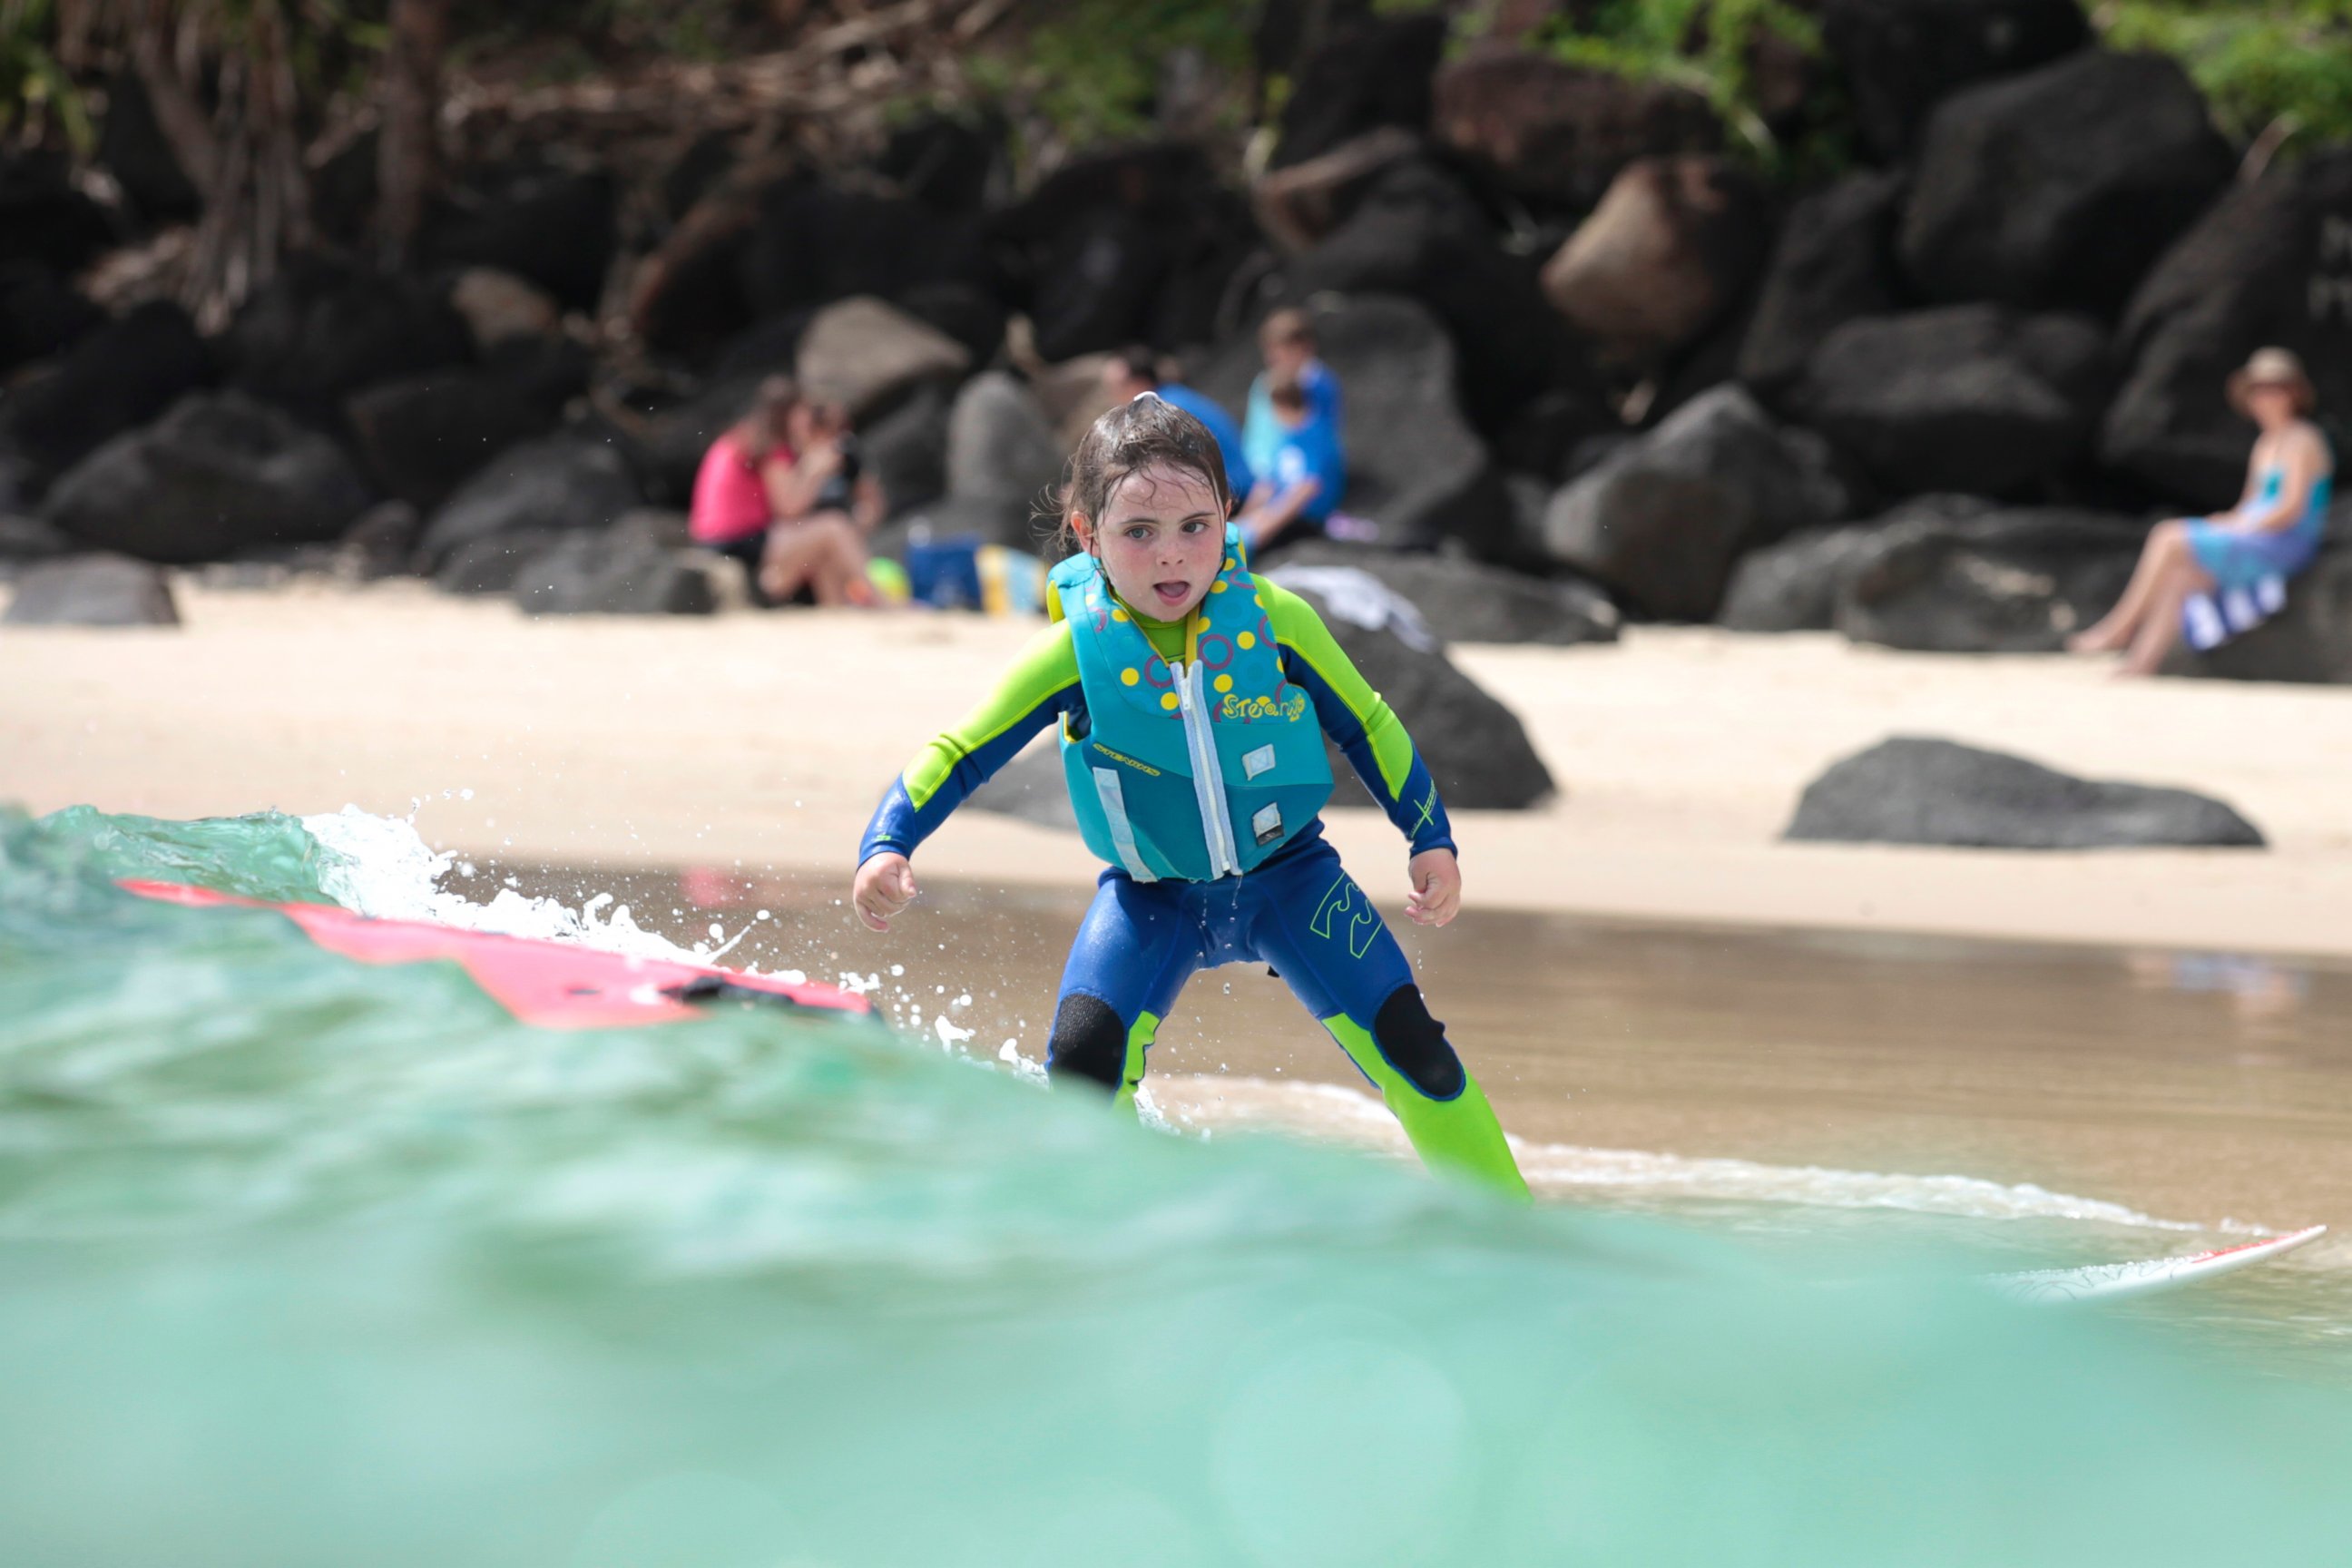 PHOTO: Quincy Symonds, 4, is pictured surfing at Snapper Rocks, Australia.